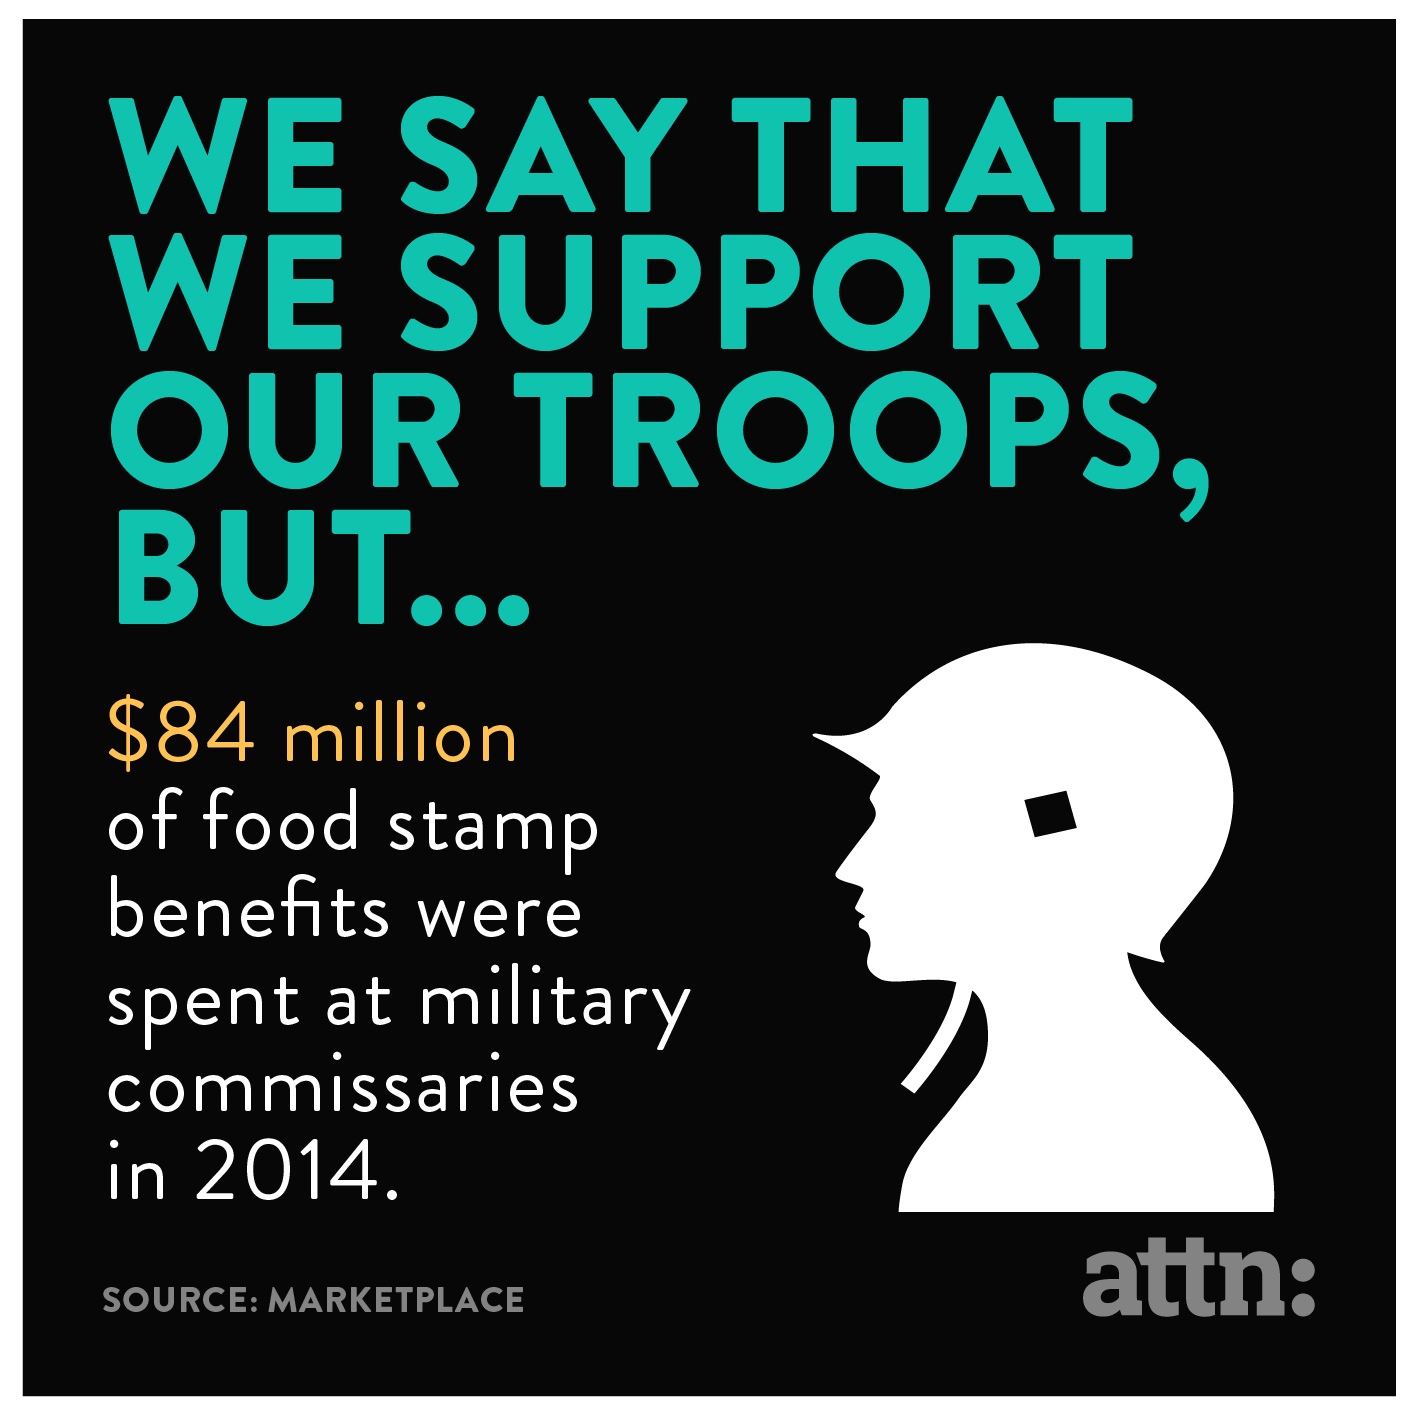 food stamps at military bases